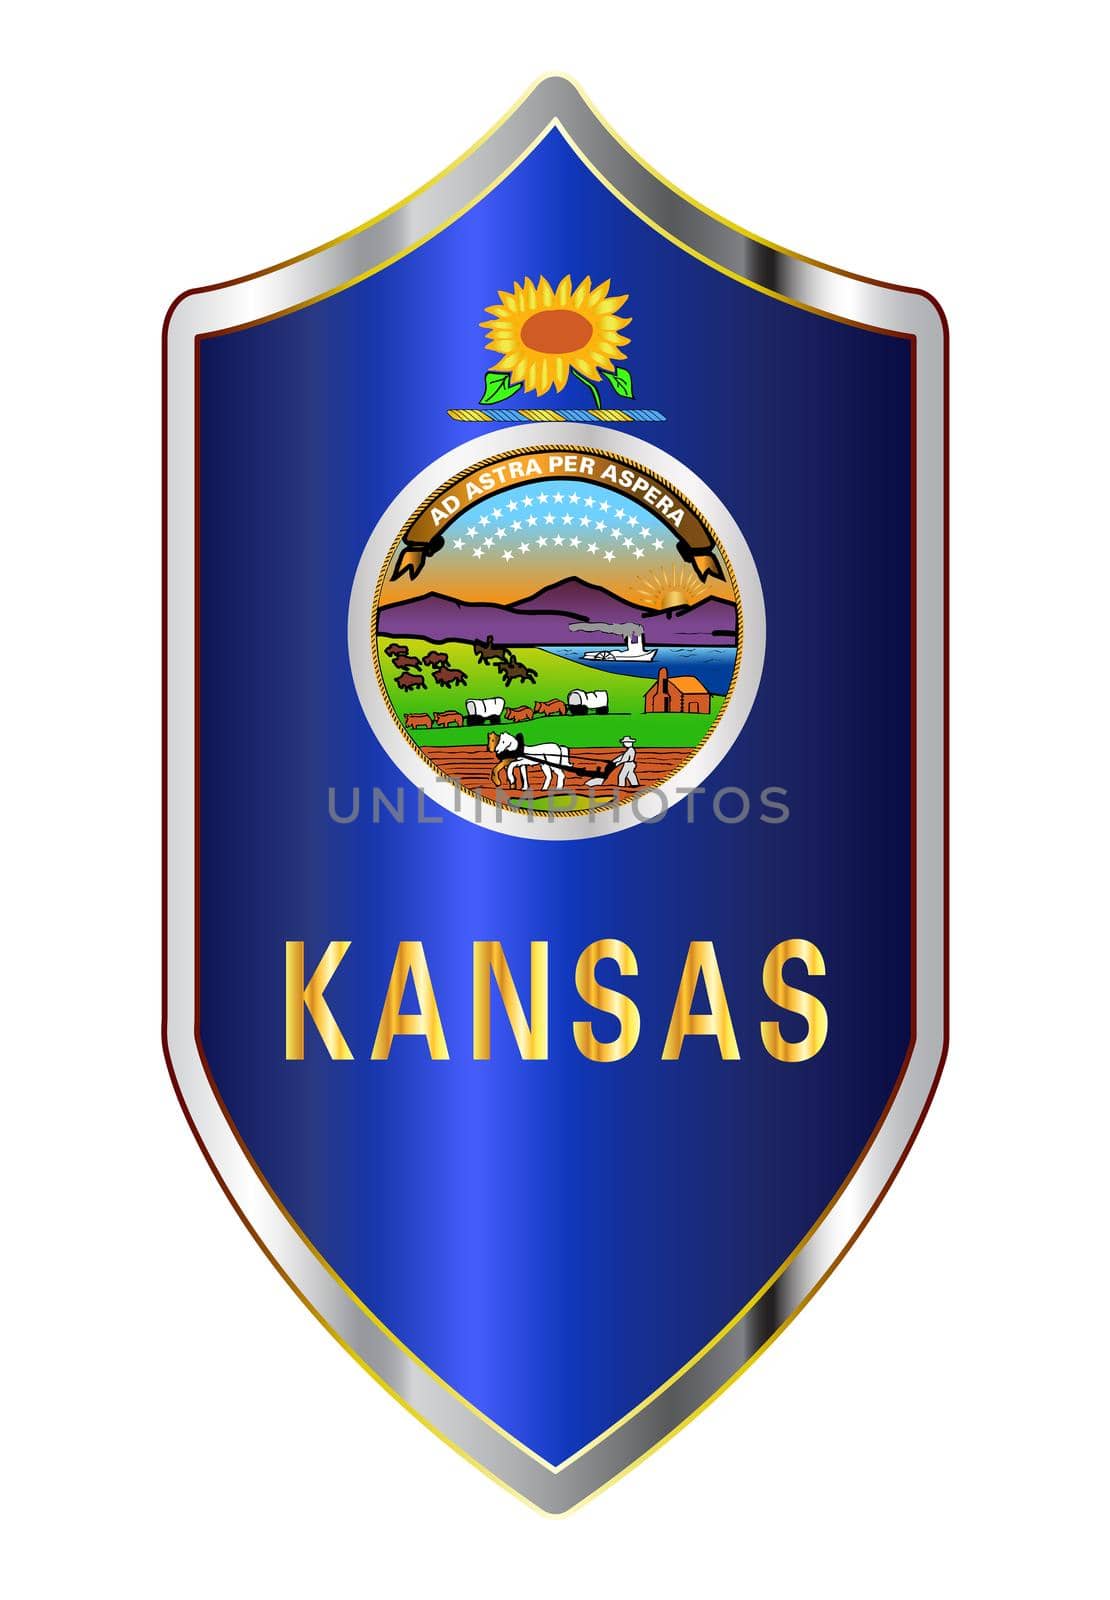 A typical crusader type shield with the state flag of Kansas all isolated on a white background